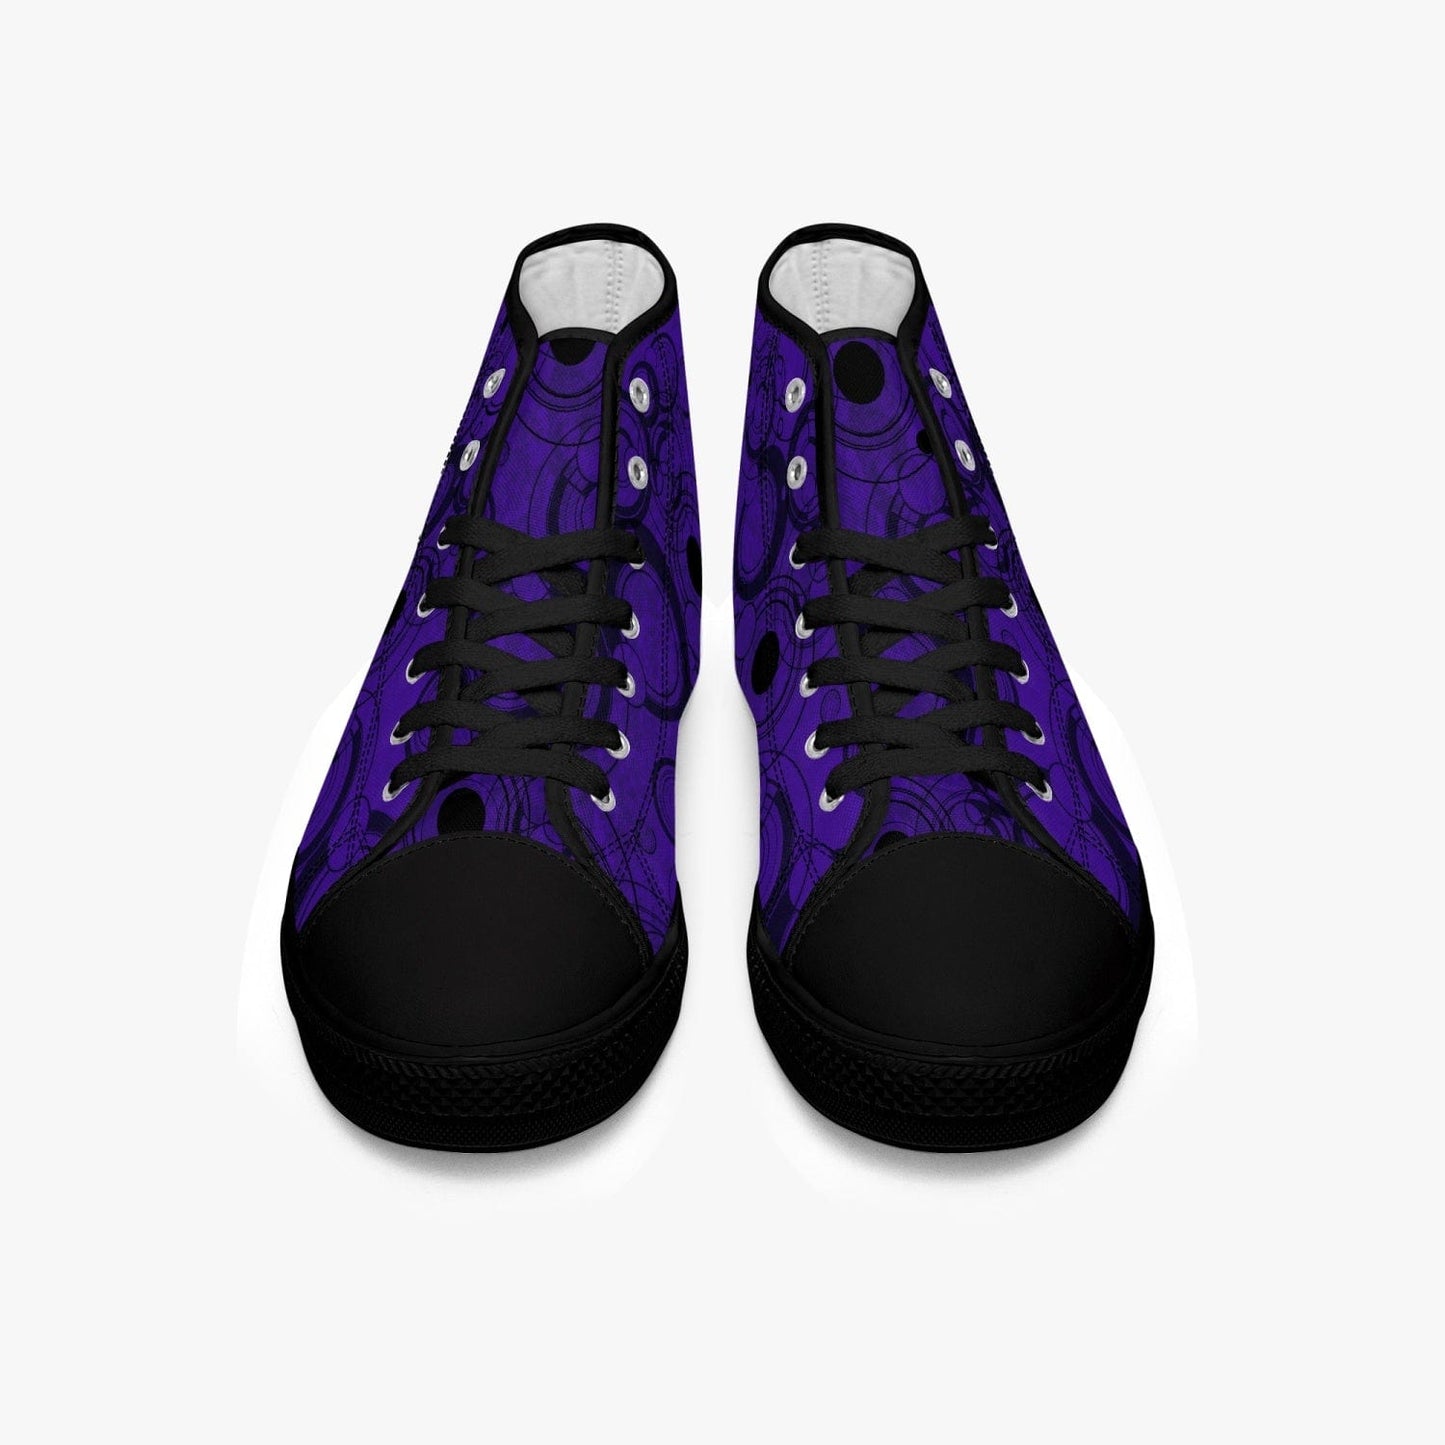 front view of the Dr Who Gallifreyan Gallifrey language high top men's sneakers in purple and black at Gallery Serpentine